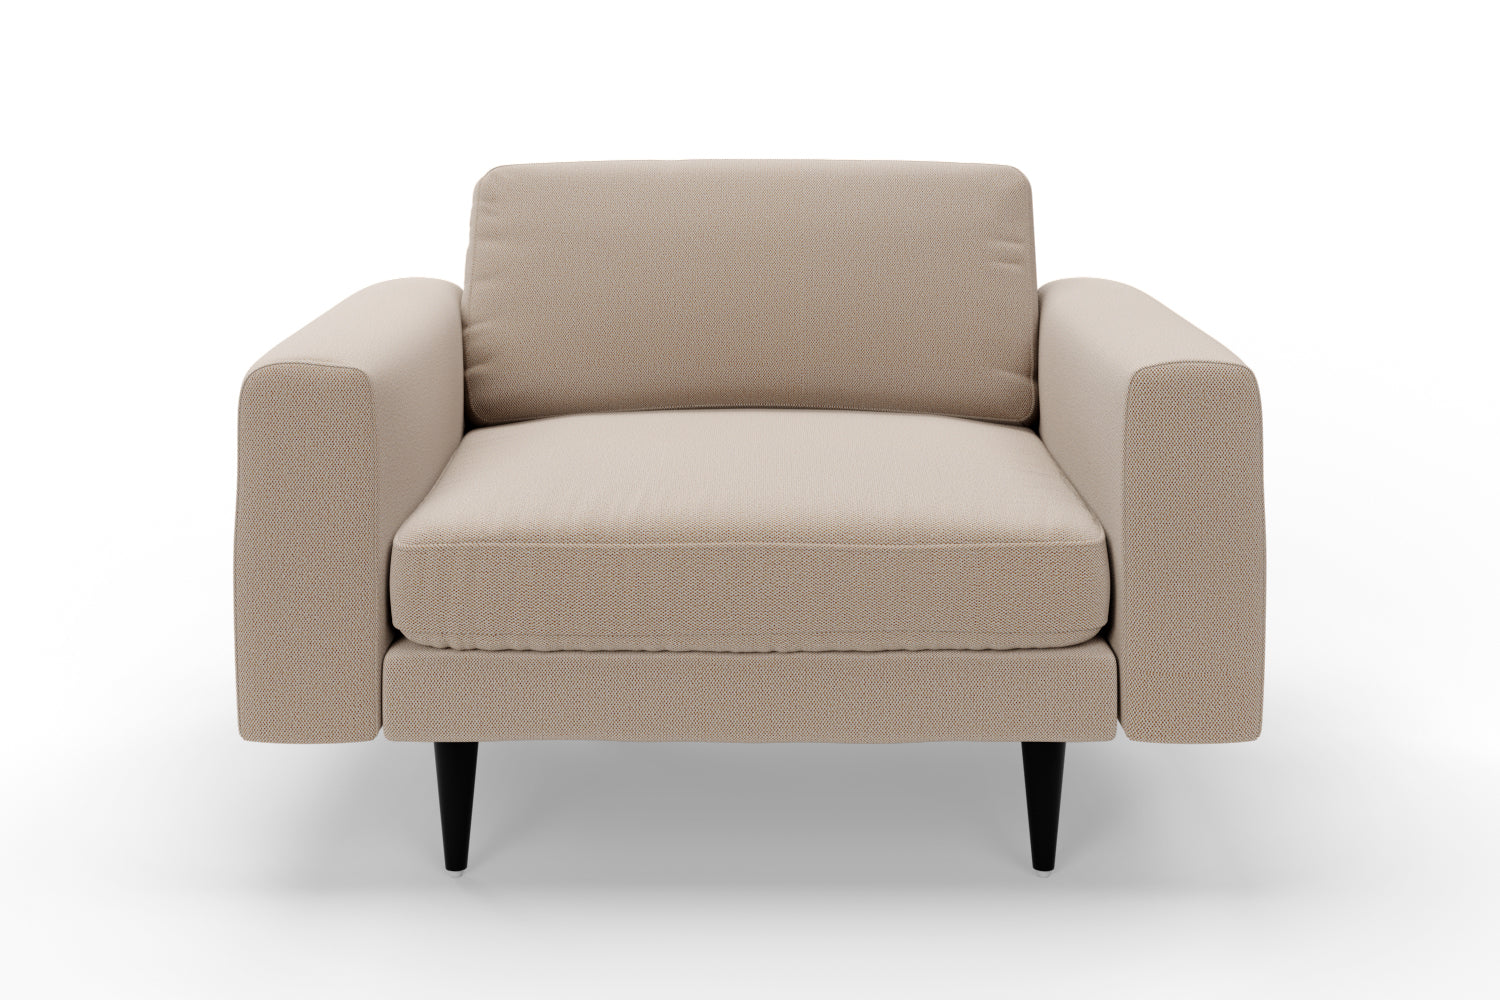 SNUG | The Big Chill 1.5 Seater Snuggler in Oatmeal variant_40414876074032